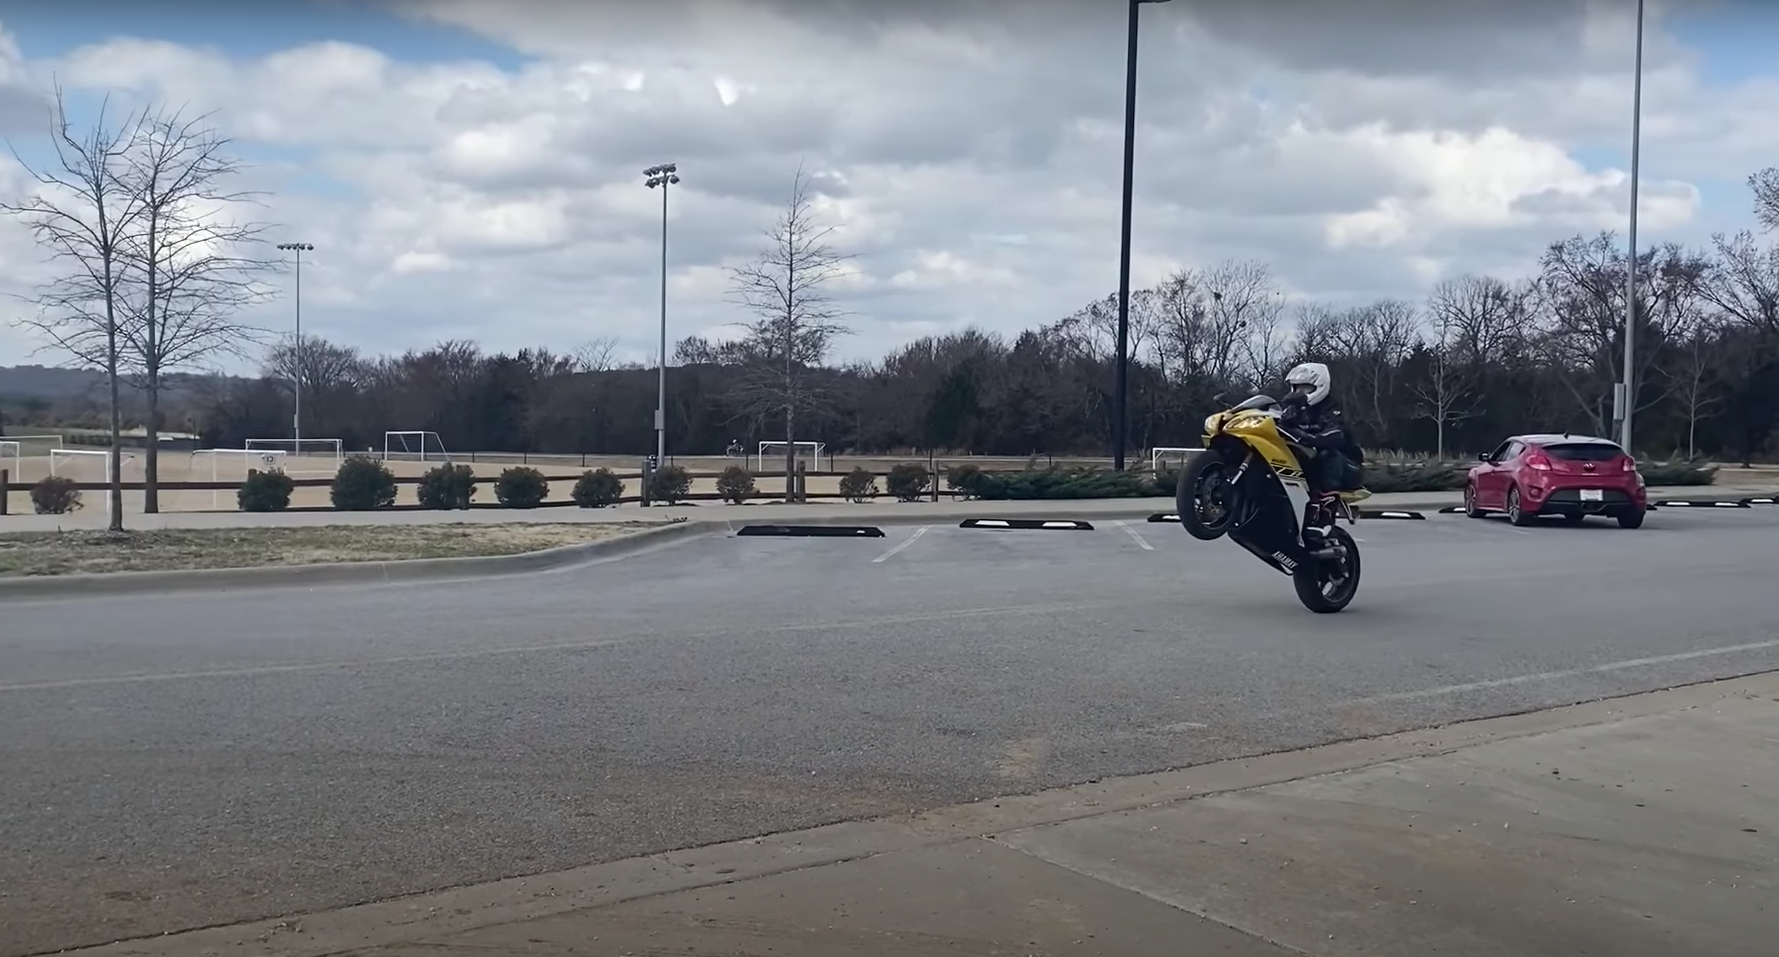 How To Do A Wheelie On A Motorcycle